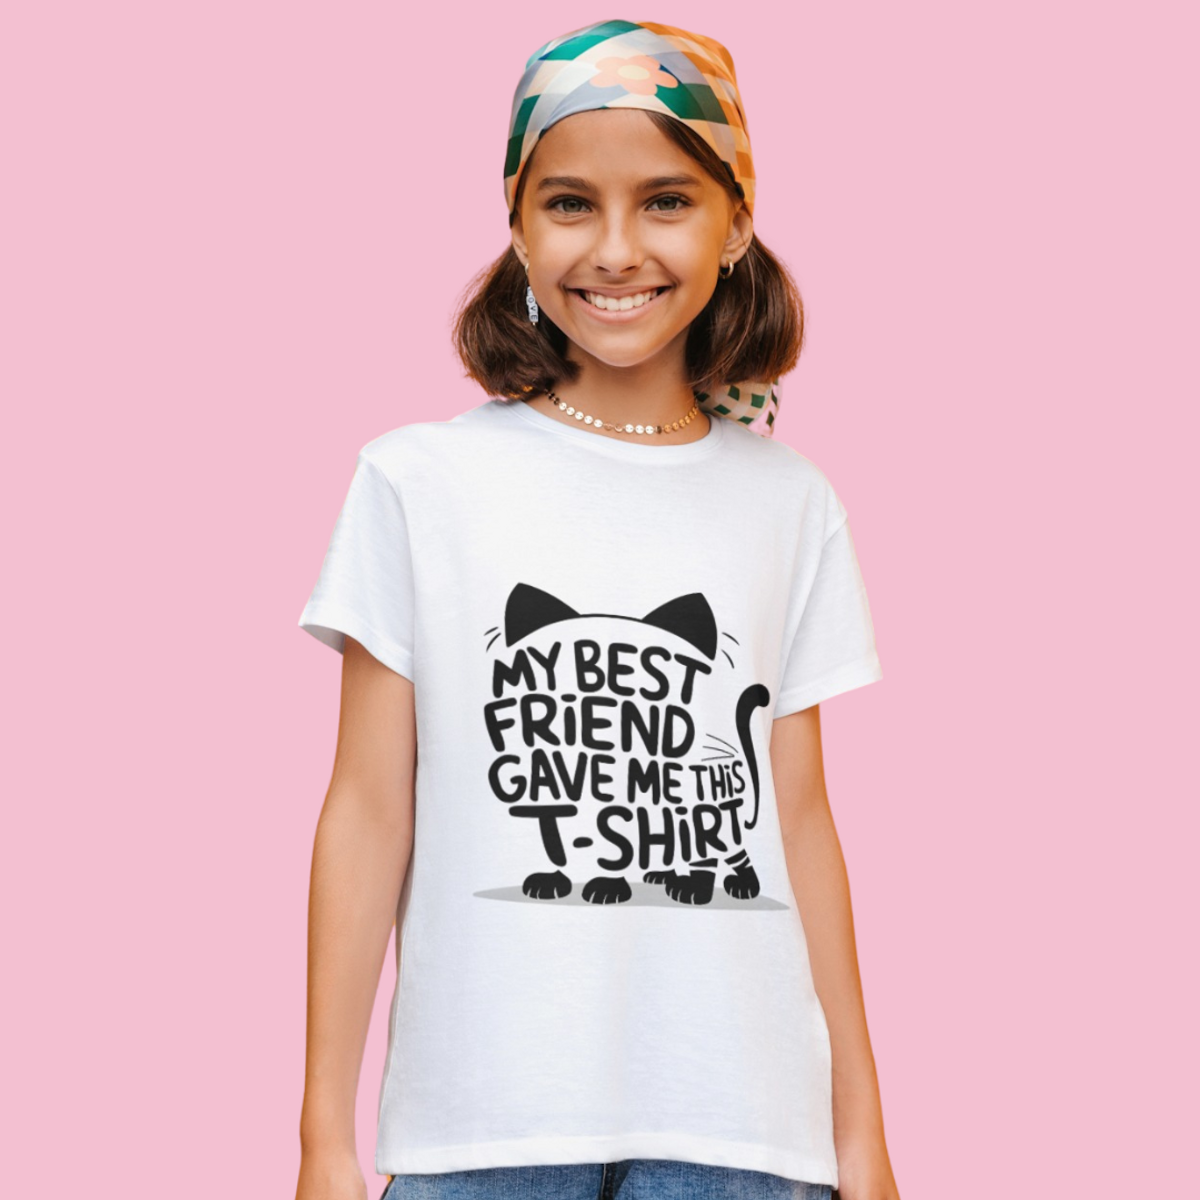 Nome do produto: Baby Long Classic - MY BEST FRIEND GAVE ME THIS  T-SHIRT